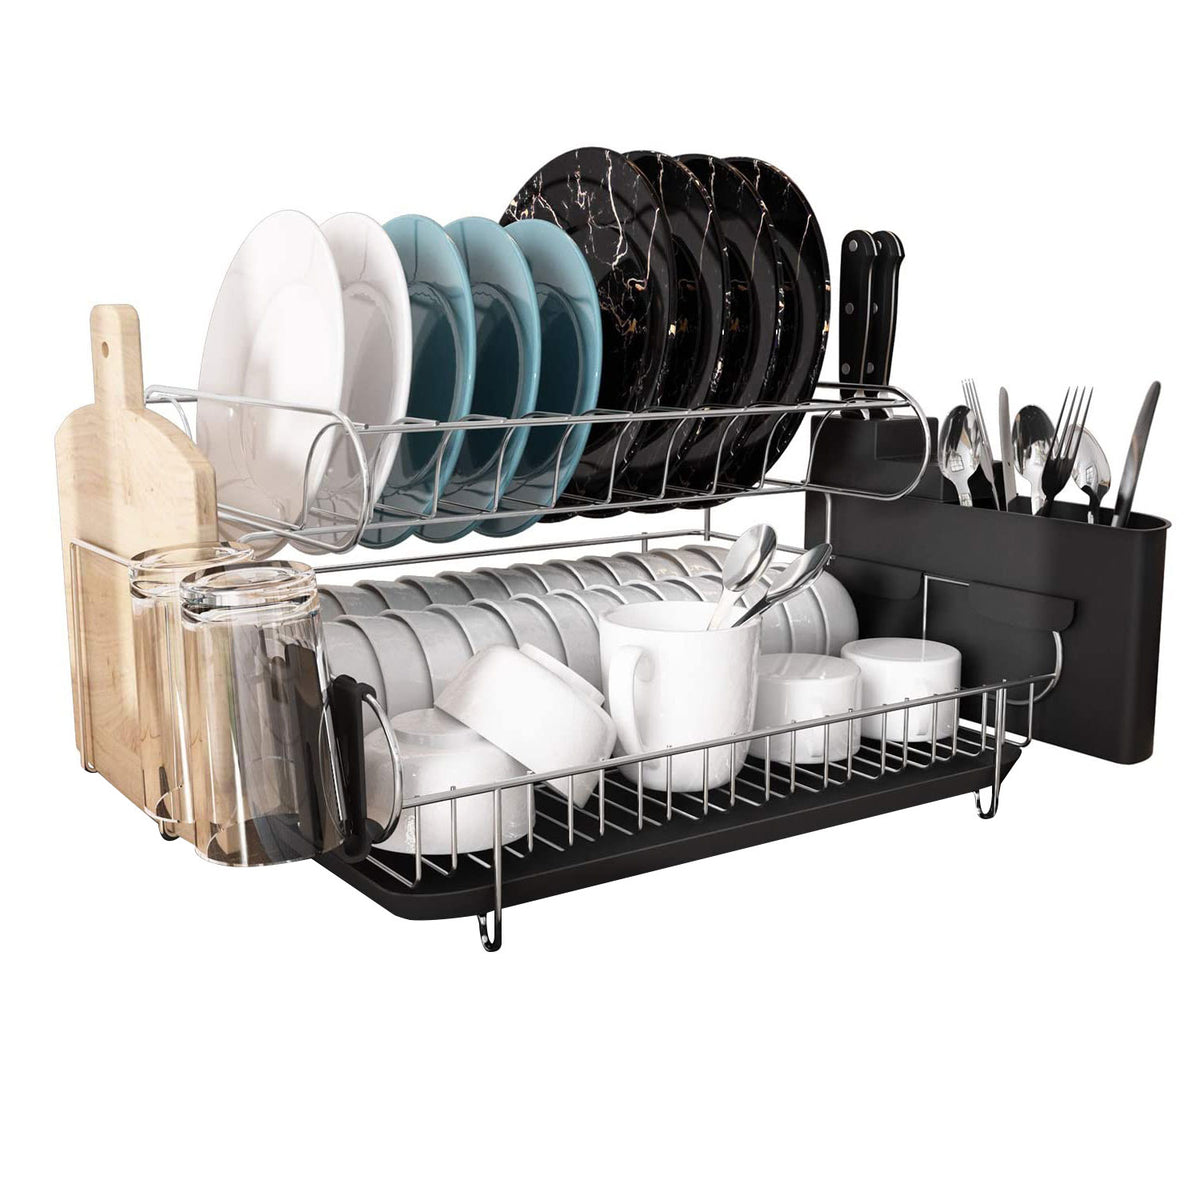  Emuca 8929865 Stainless steel dish drying rack for standard  80cm-widht kitchen cabinet : Home & Kitchen